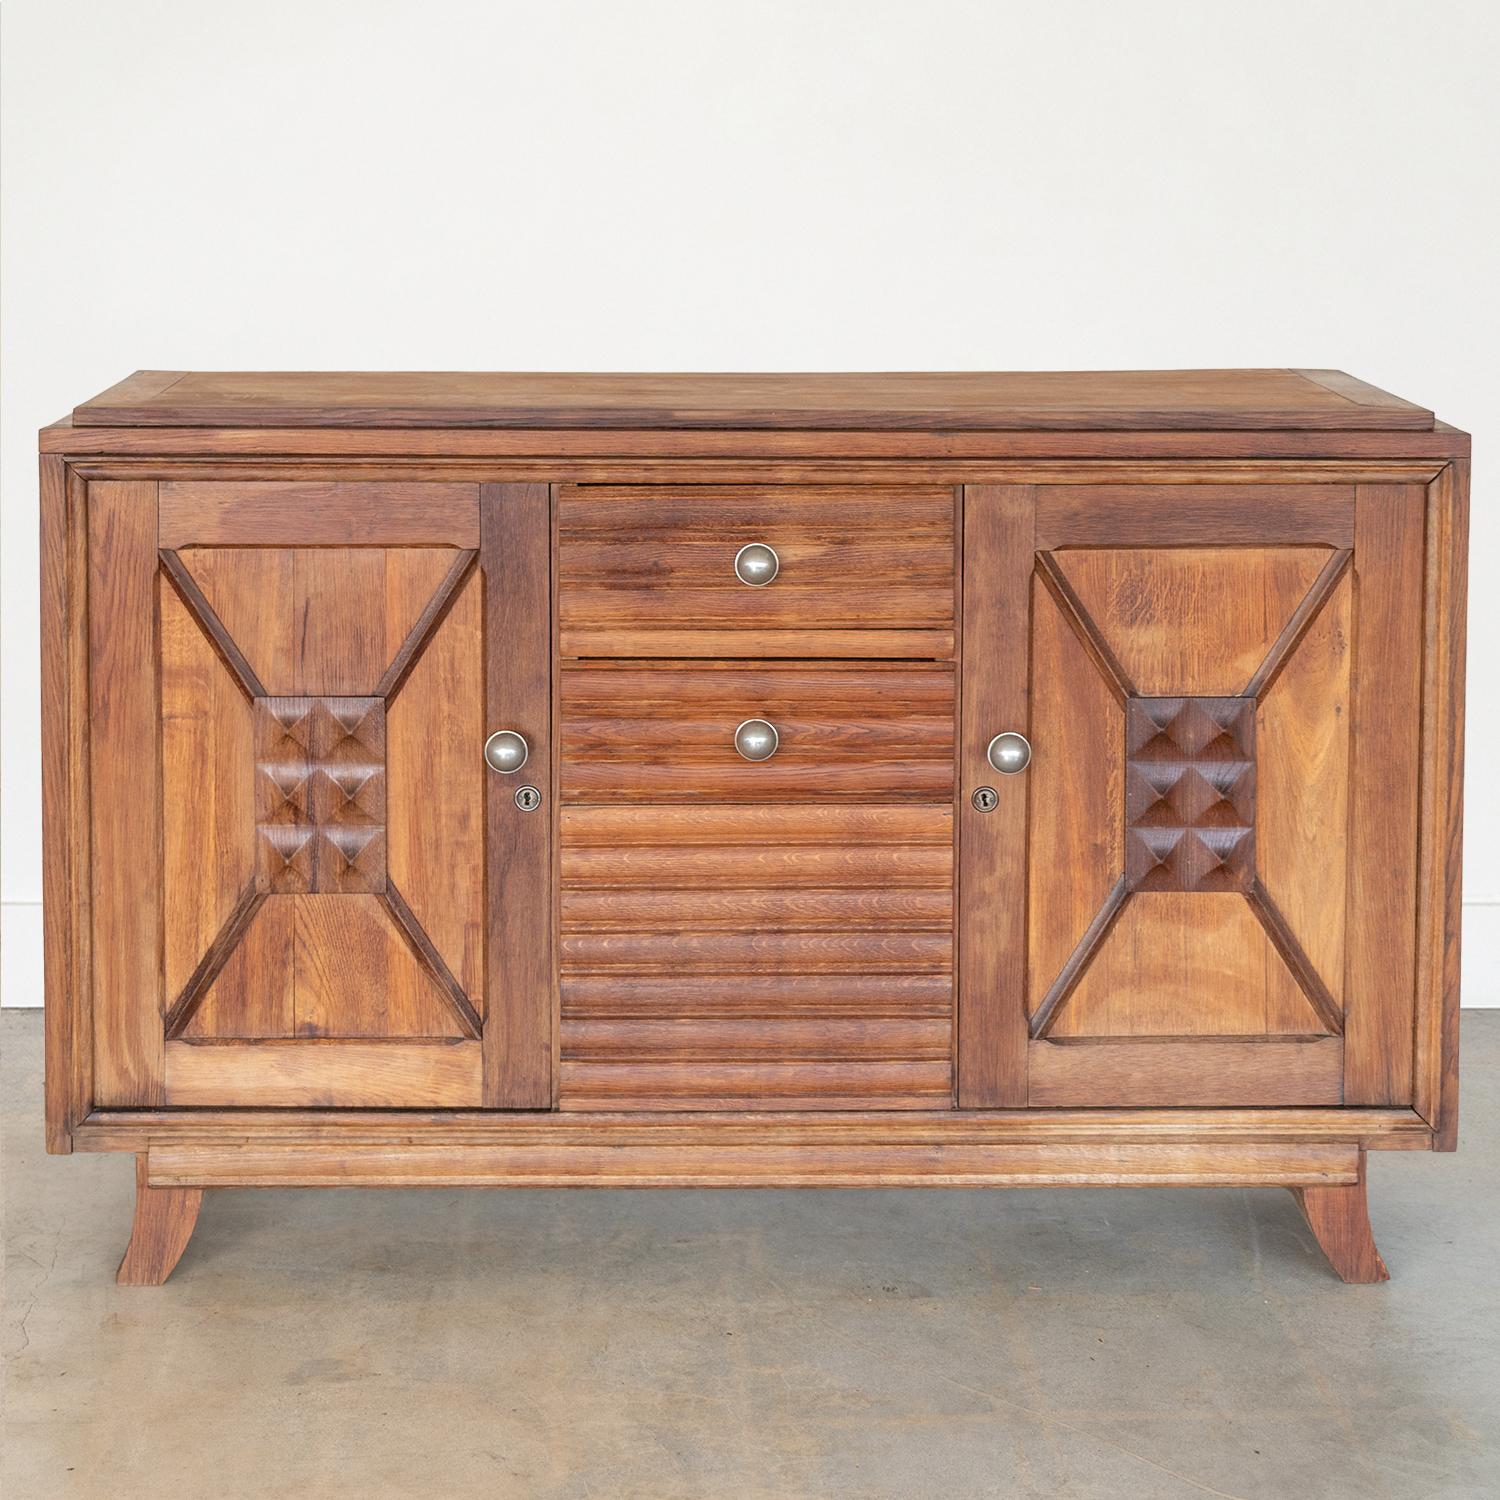 Incredible wood sideboard in the style of Charles Dudouyt from France, 1940's. Beautiful carved wood squares on cabinet doors and chunky curved legs. Large round silver knobs add bold contrast. Cabinet doors on each end open to a single shelf for